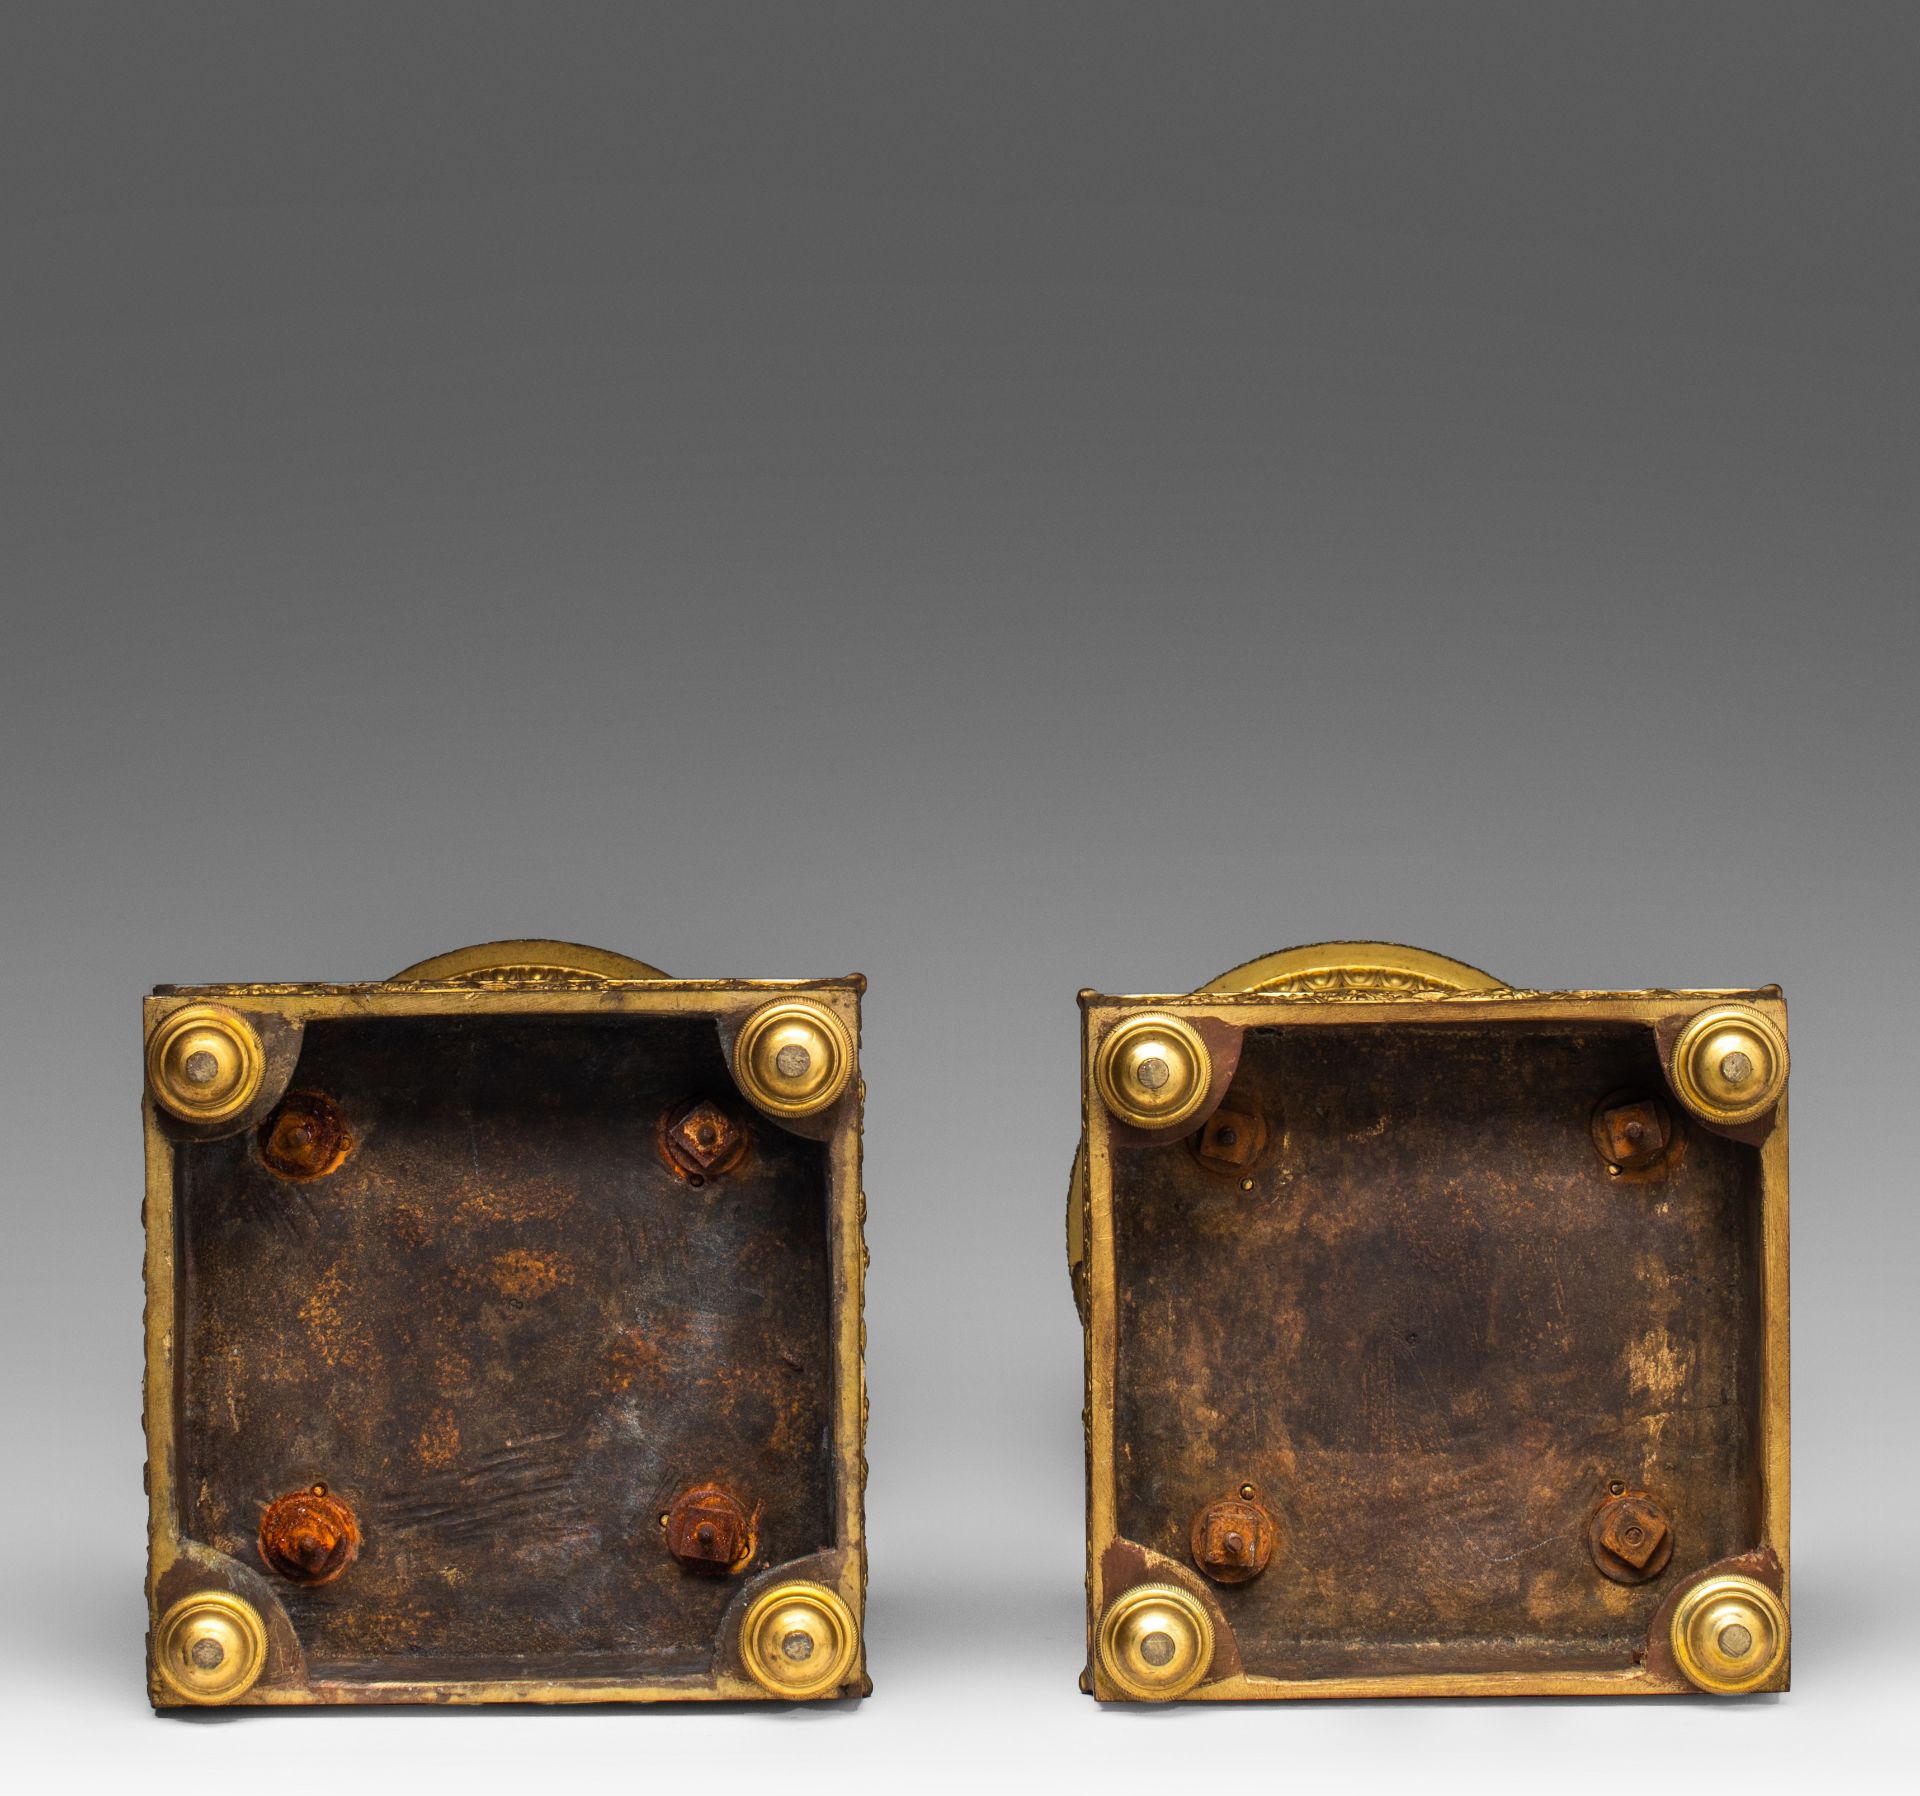 A pair of Neoclassical gilt bronze-mounted porphyry cassolettes, 19thC, H 35 cm - Image 5 of 8